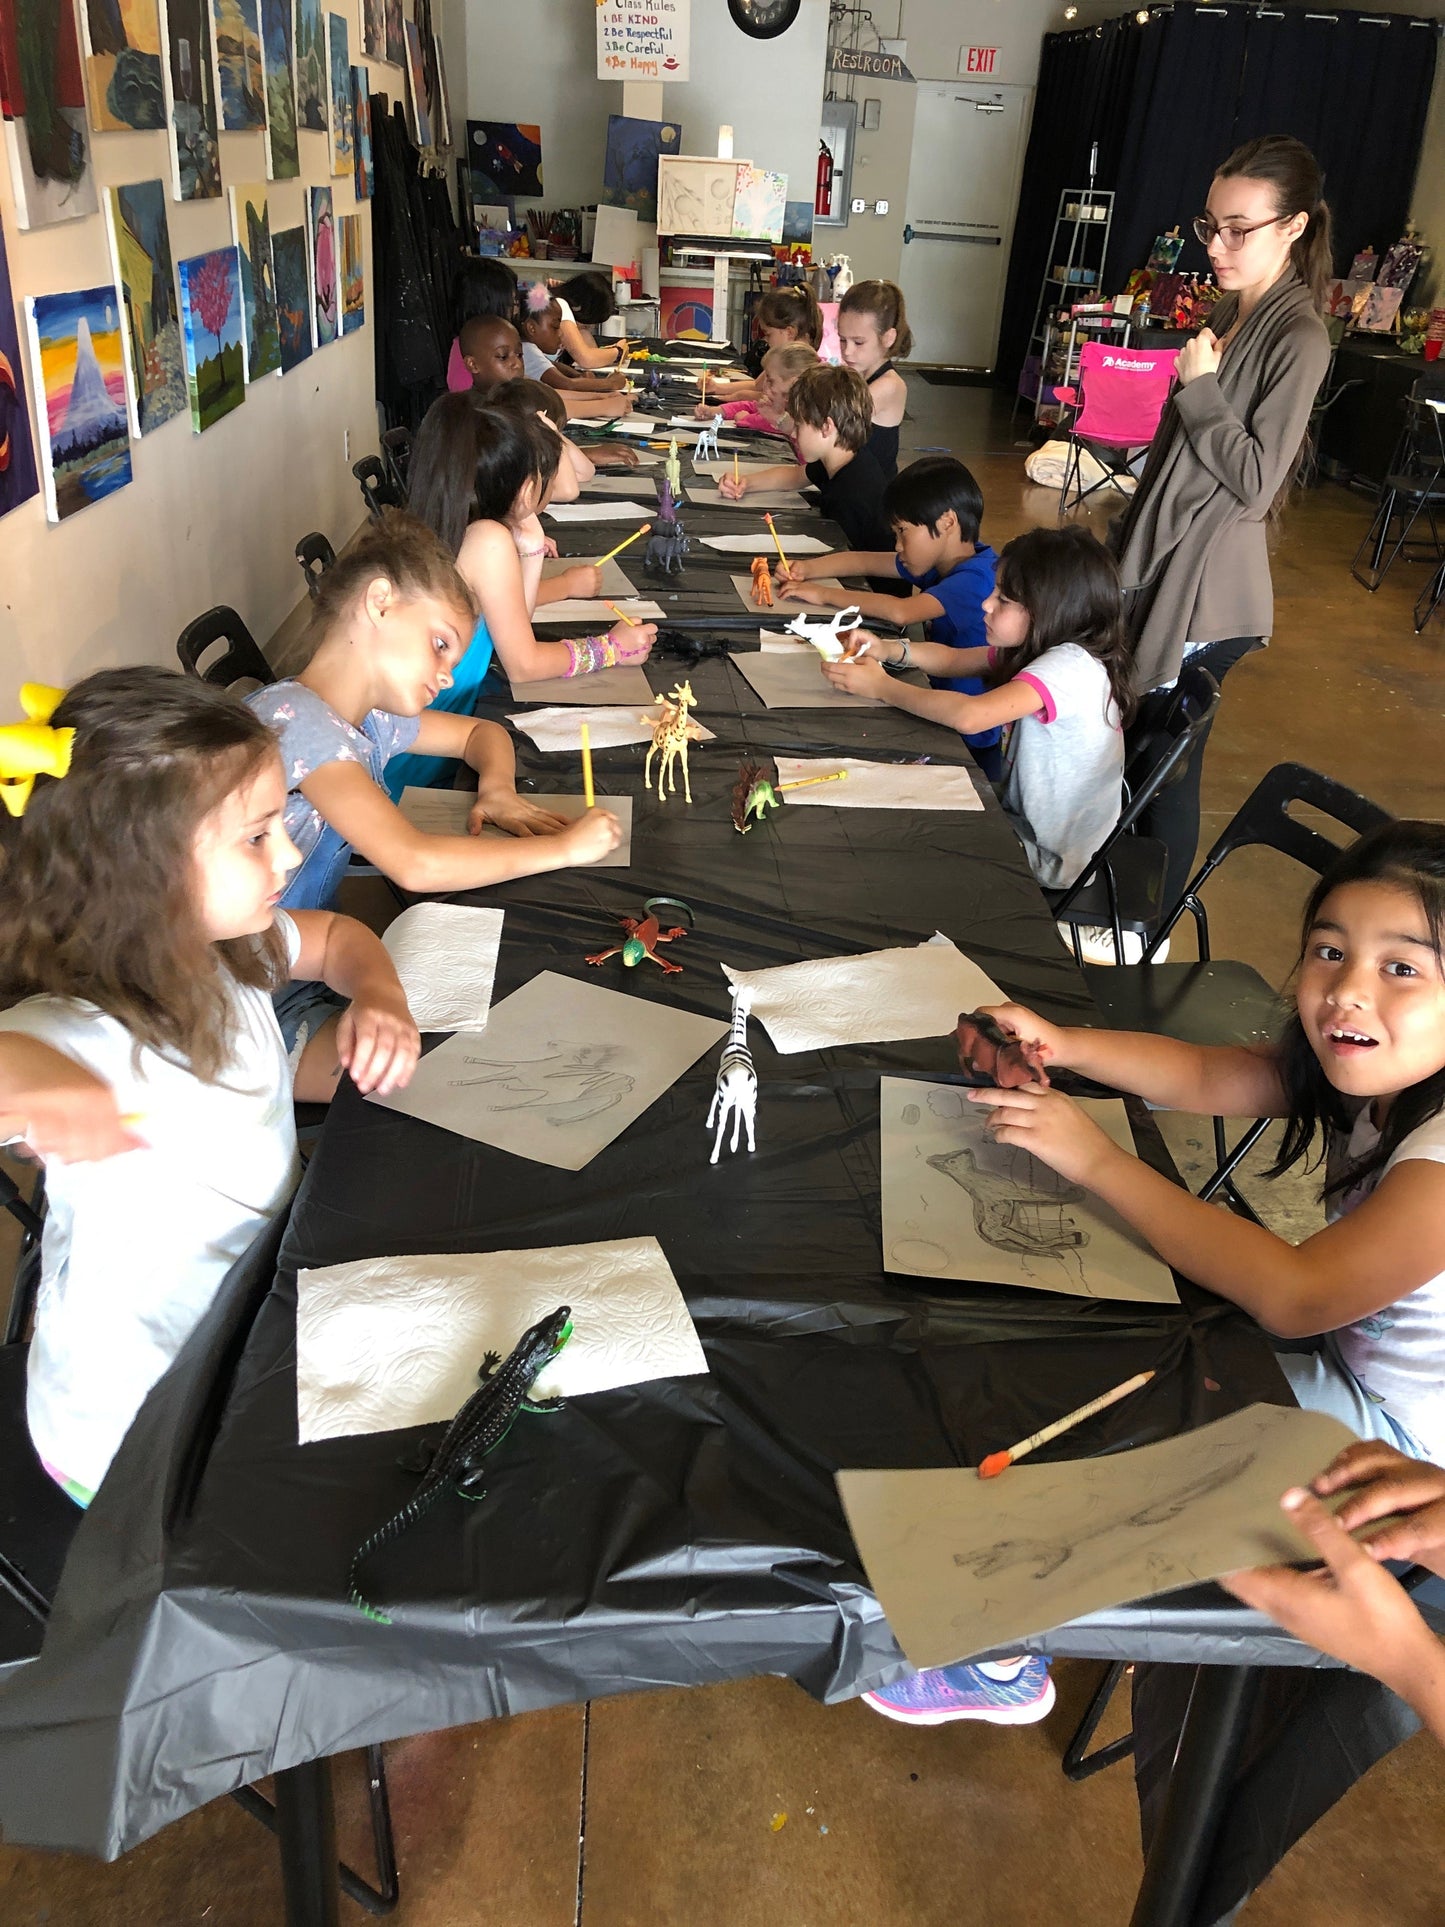 Wed, Oct 18th, 4-6P Kids Paint “Sketching Dragons & Spiders” Public Houston Art Class